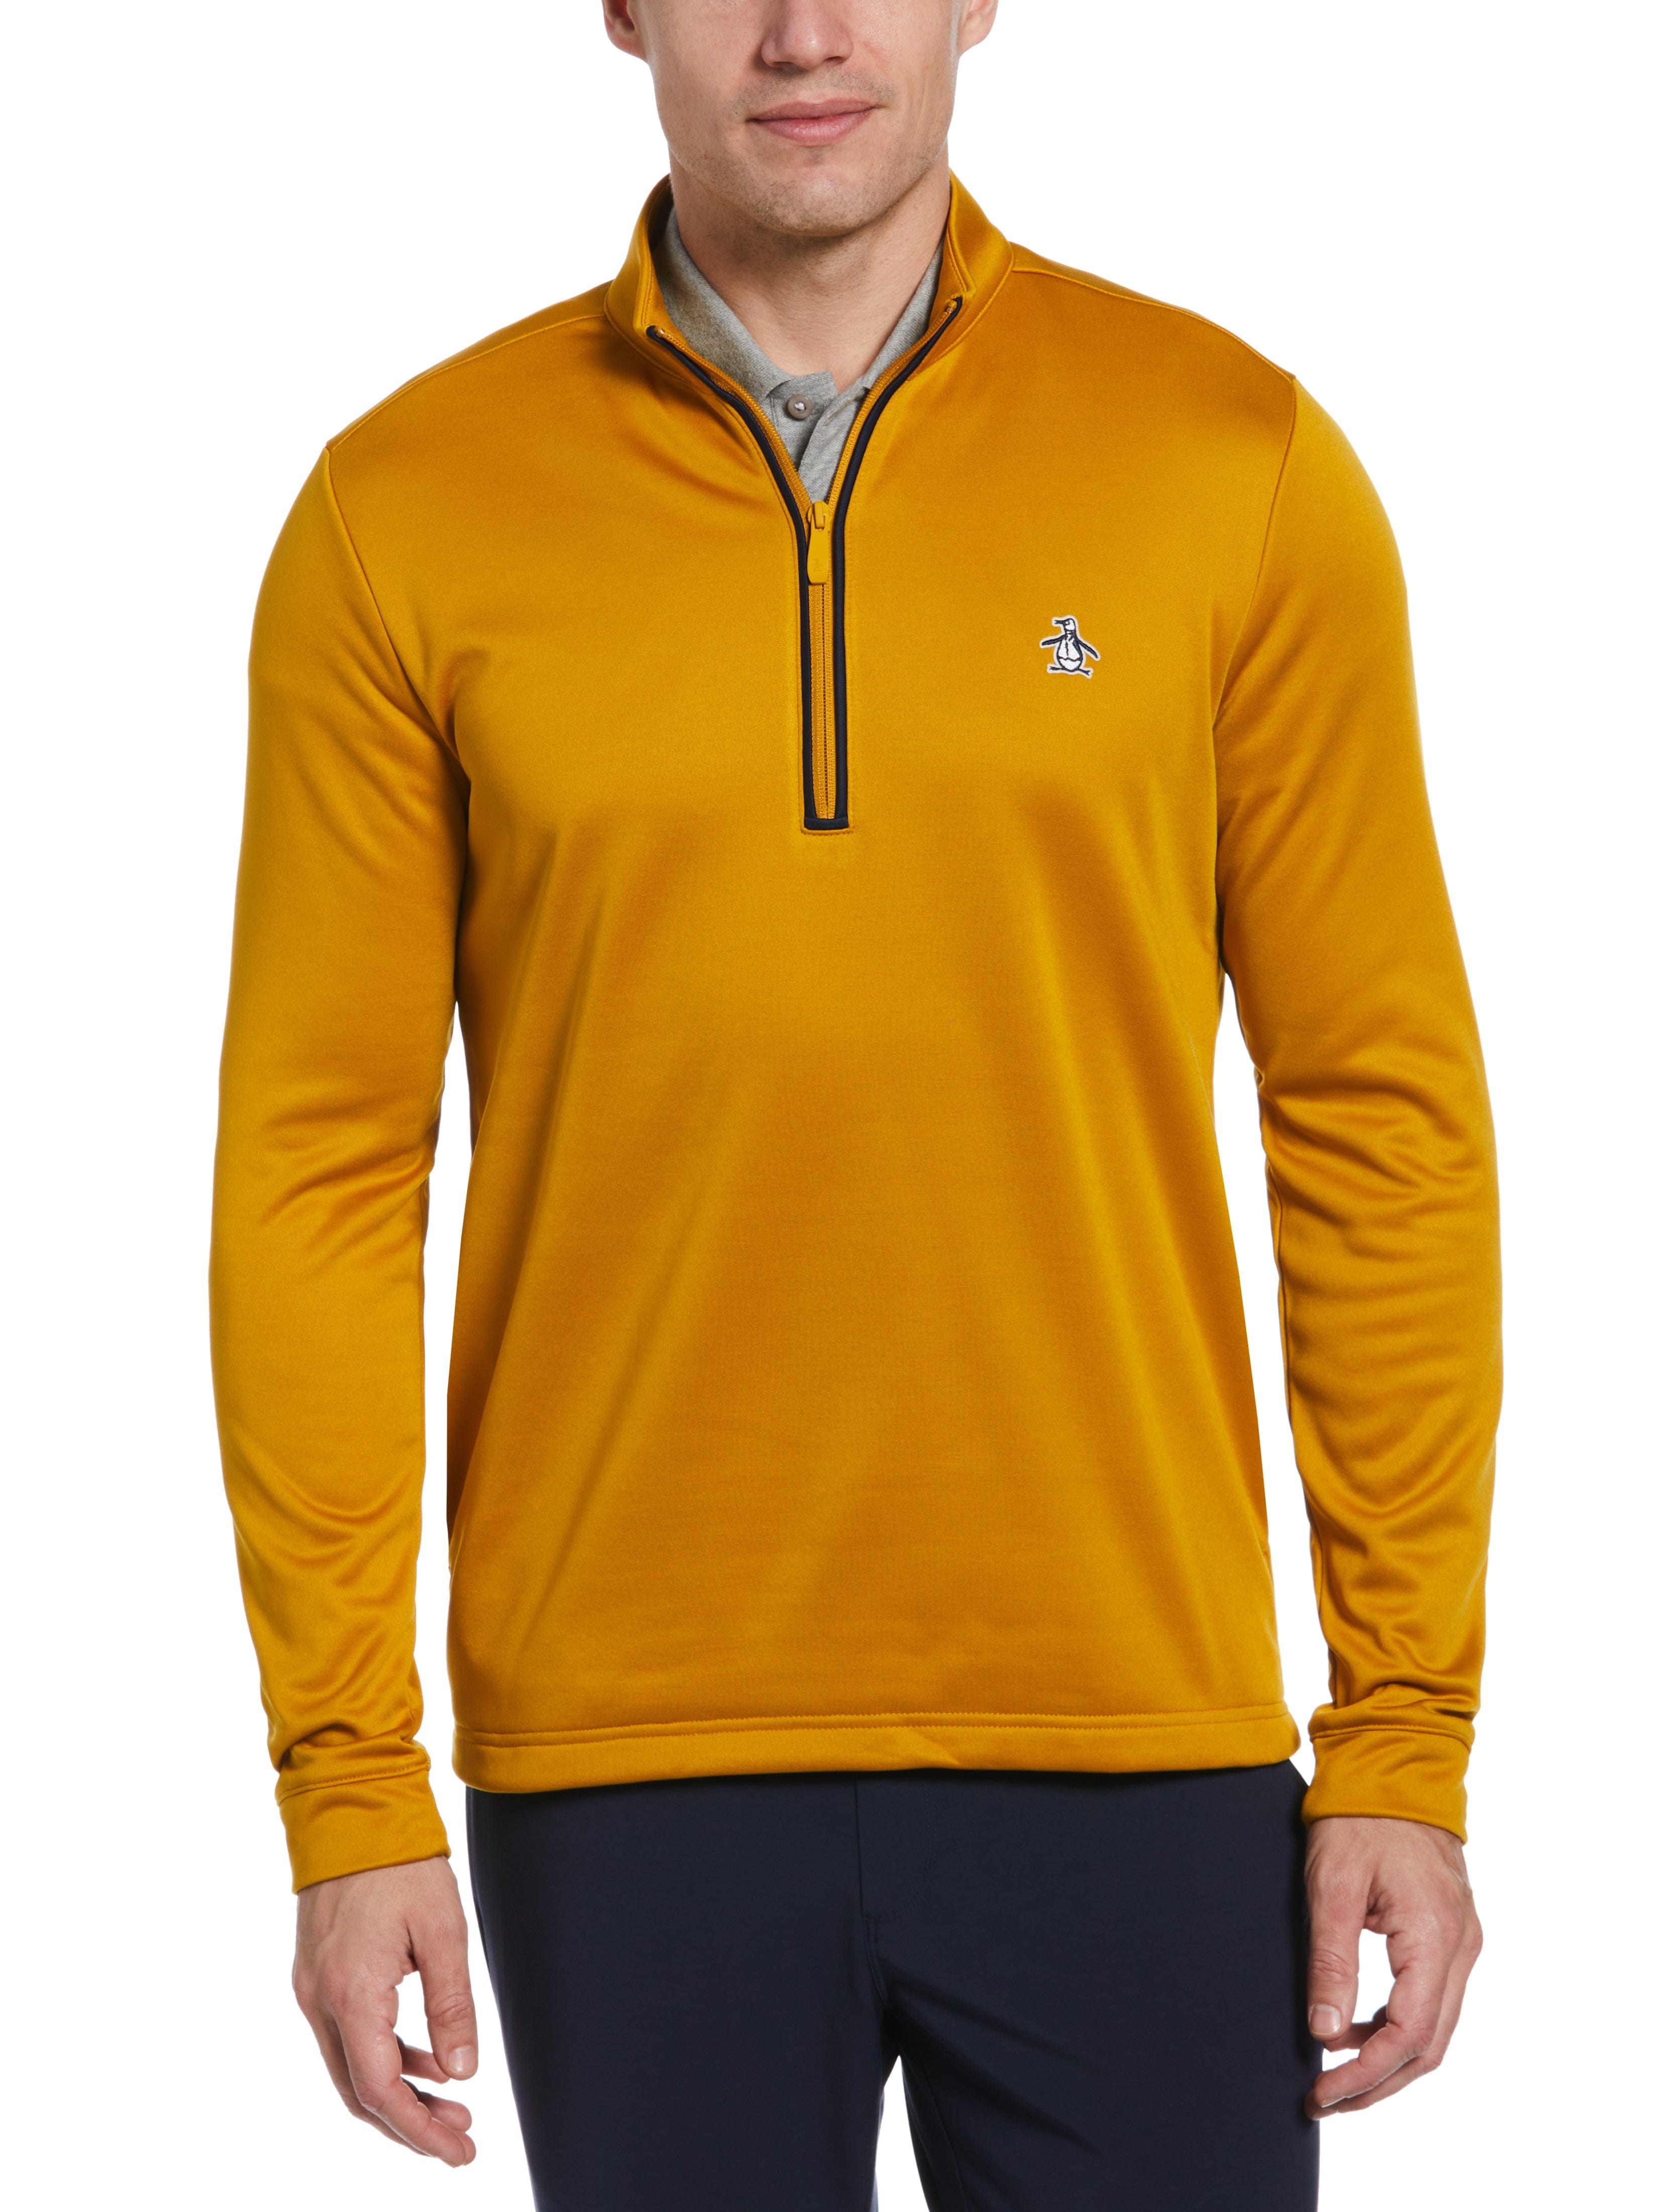 Original Penguin Mens 1/4 Zip Pull Over Jacket Top, Size Large, Chai Tea Yellow, 100% Polyester | Golf Apparel Shop